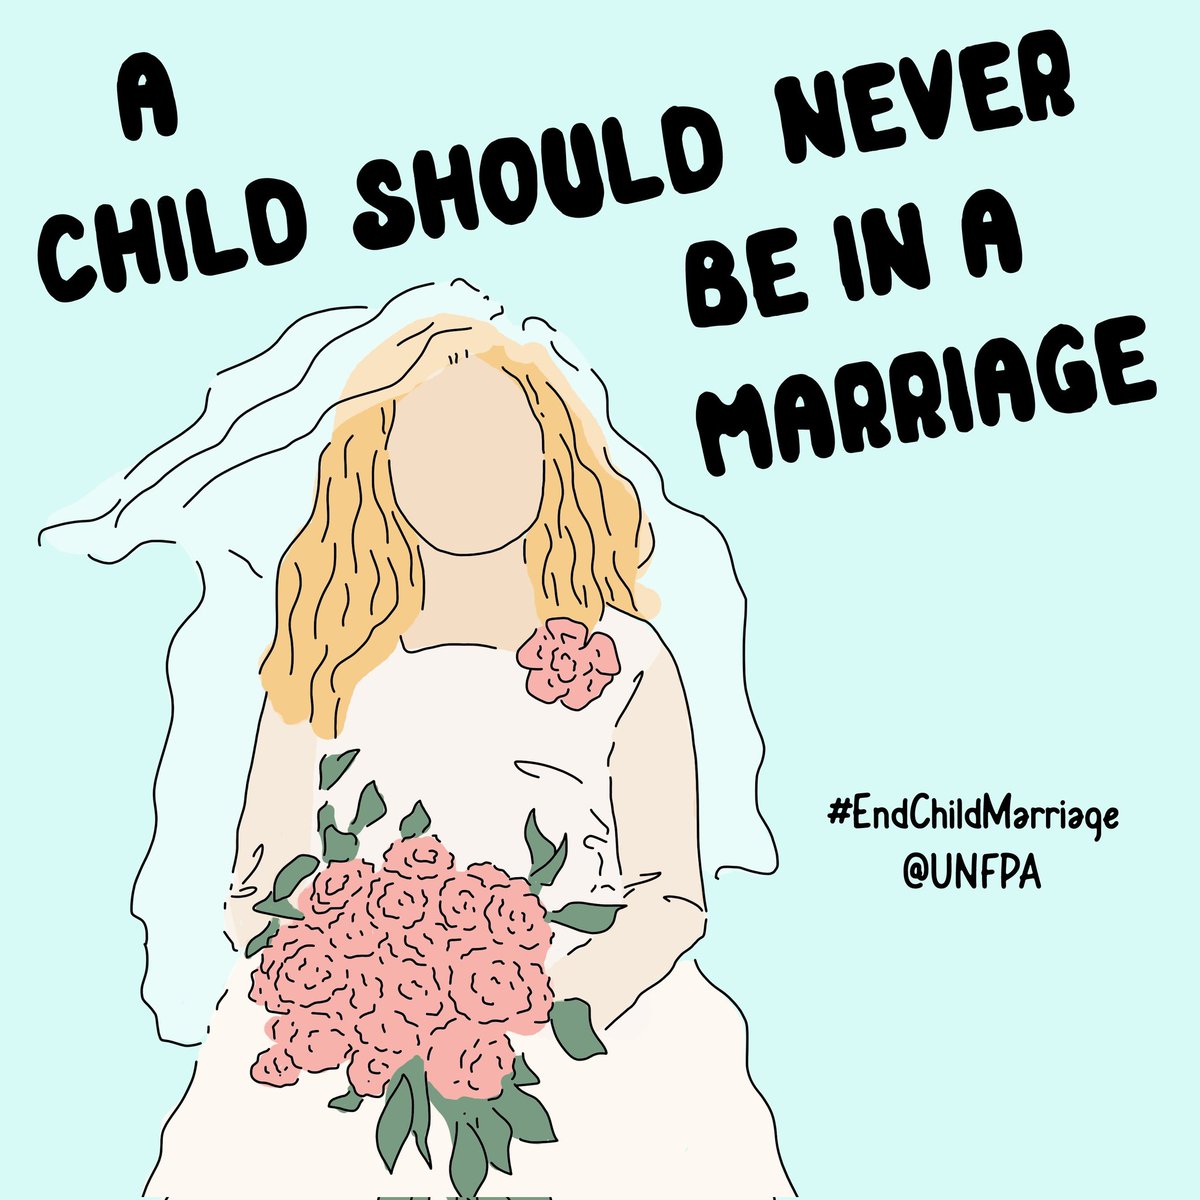 A child should never be in a marriage.. It affects their future plans, their mental health and other disastrous effects..
#ProtectGirls 
#EndChildMarriages